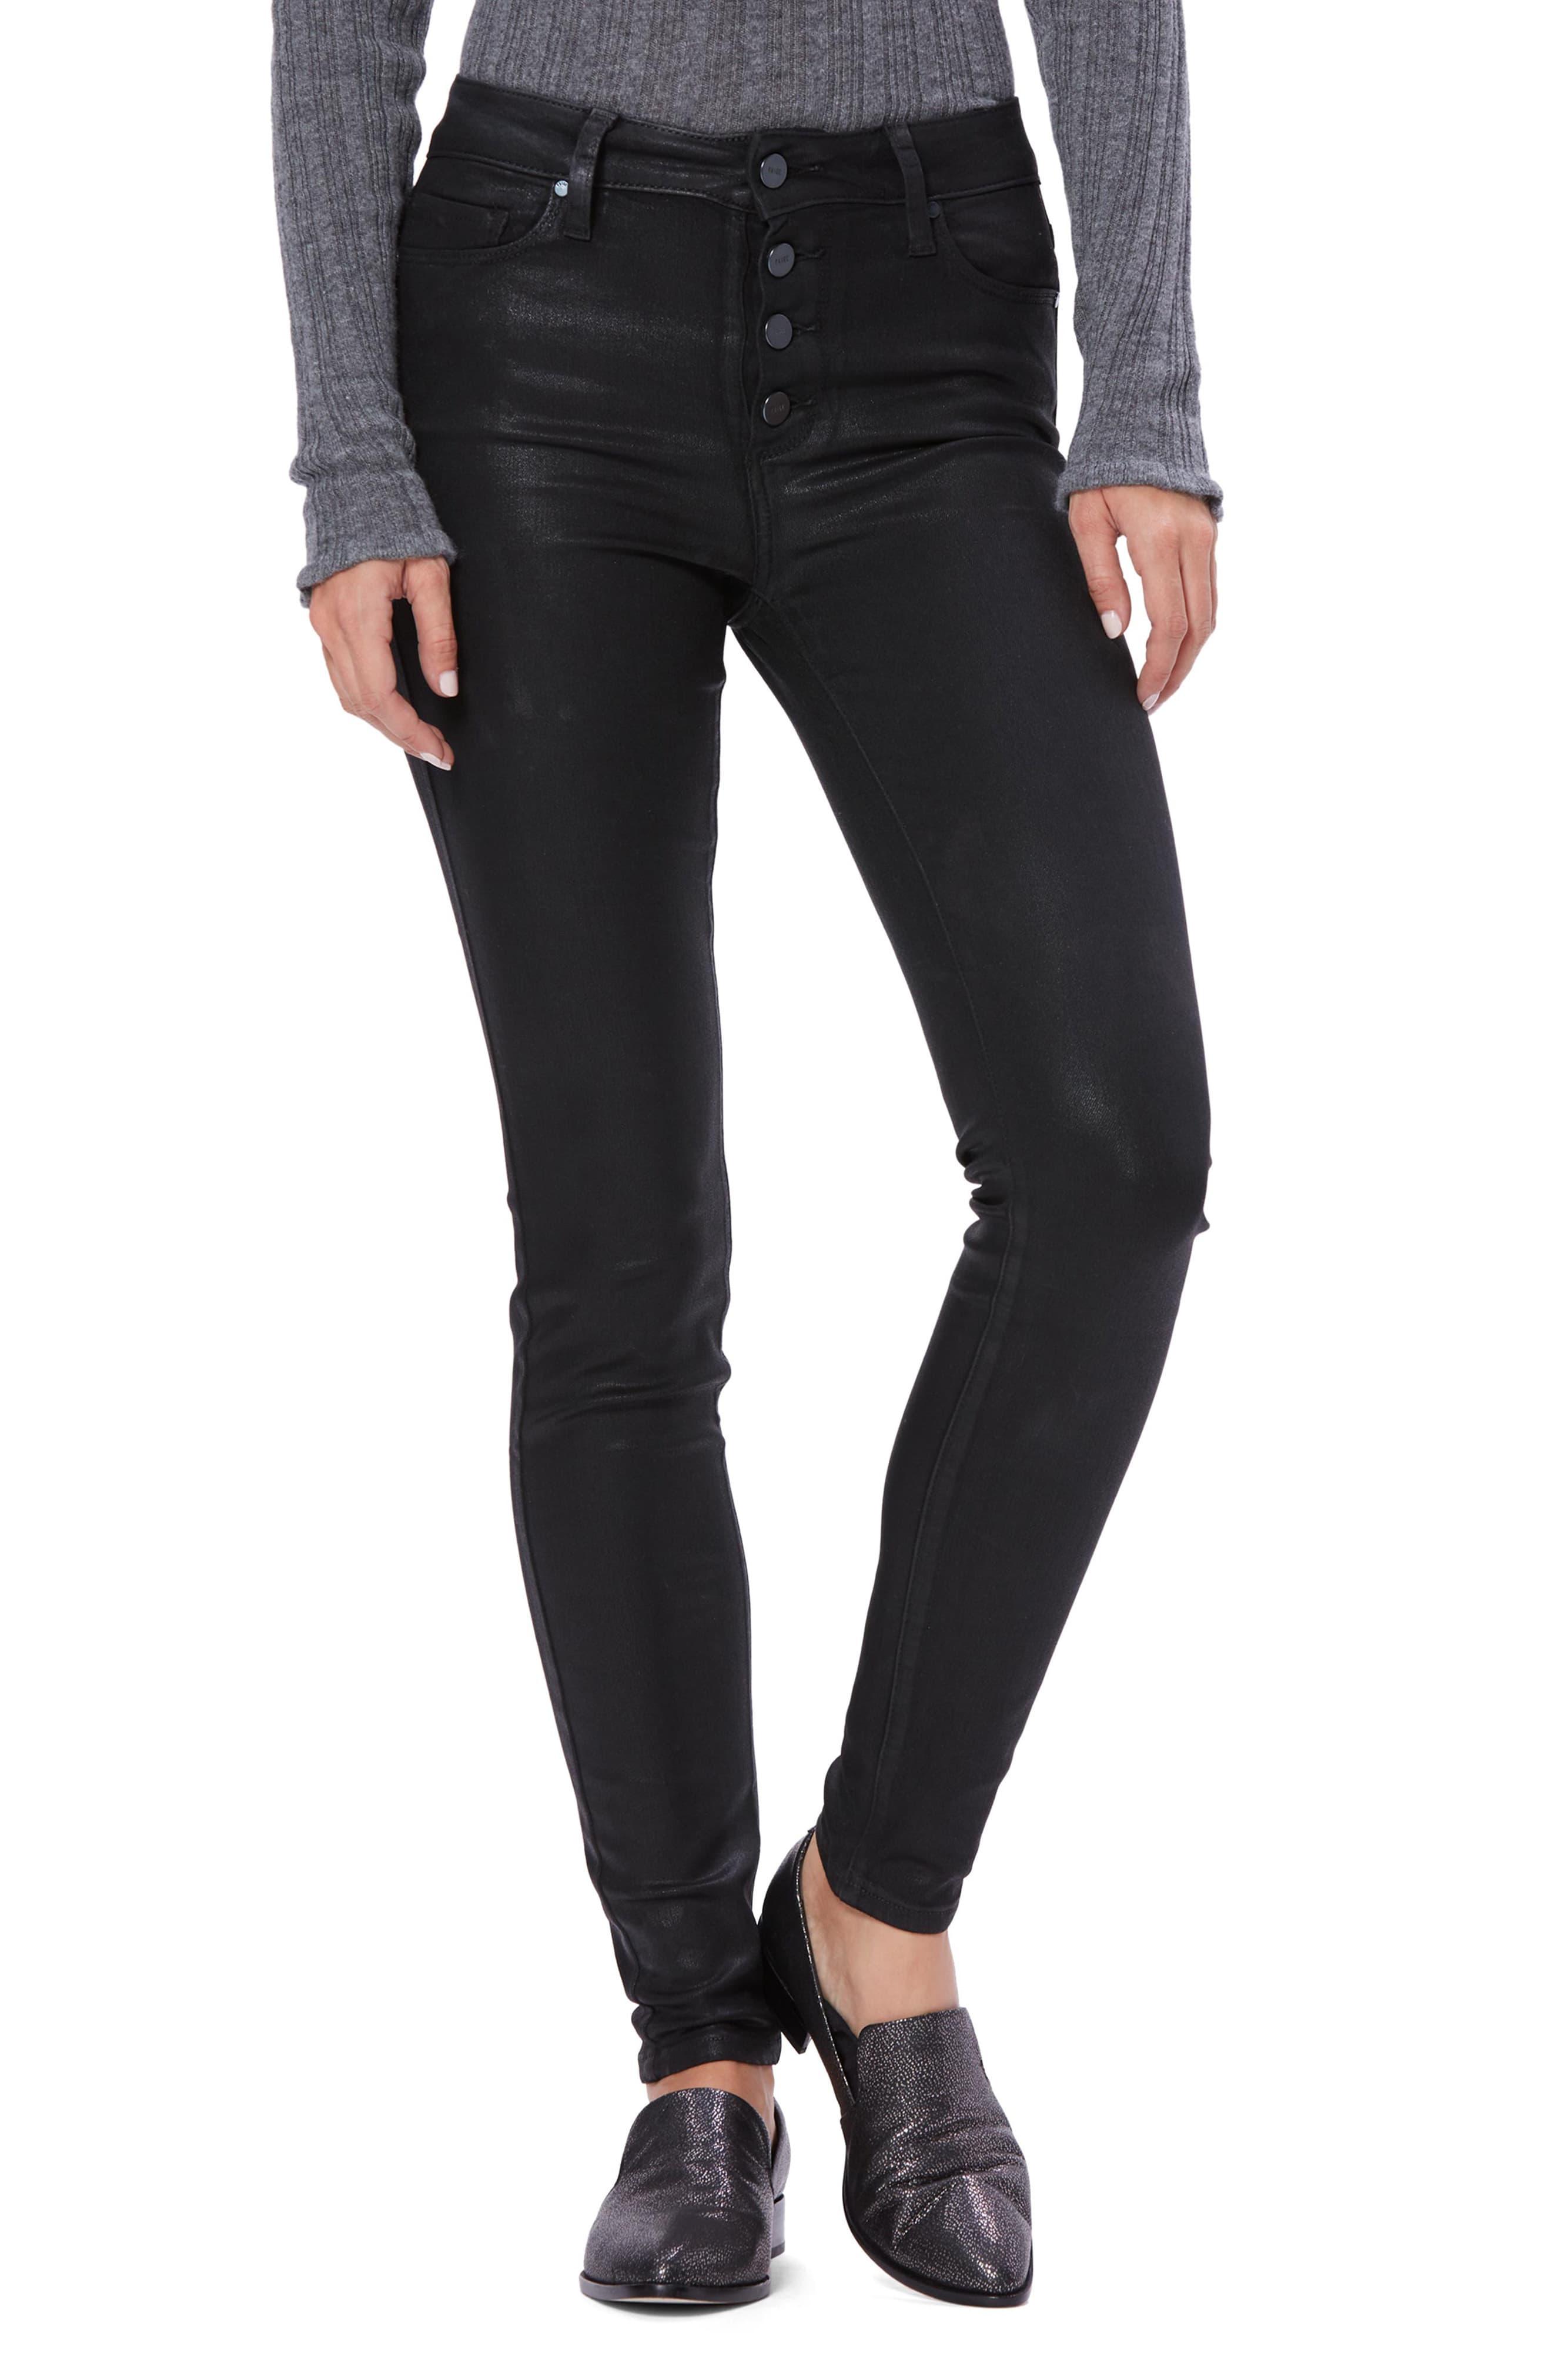 PAIGE Denim Transcend - Hoxton Coated High Waist Ultra Skinny Jeans in ...